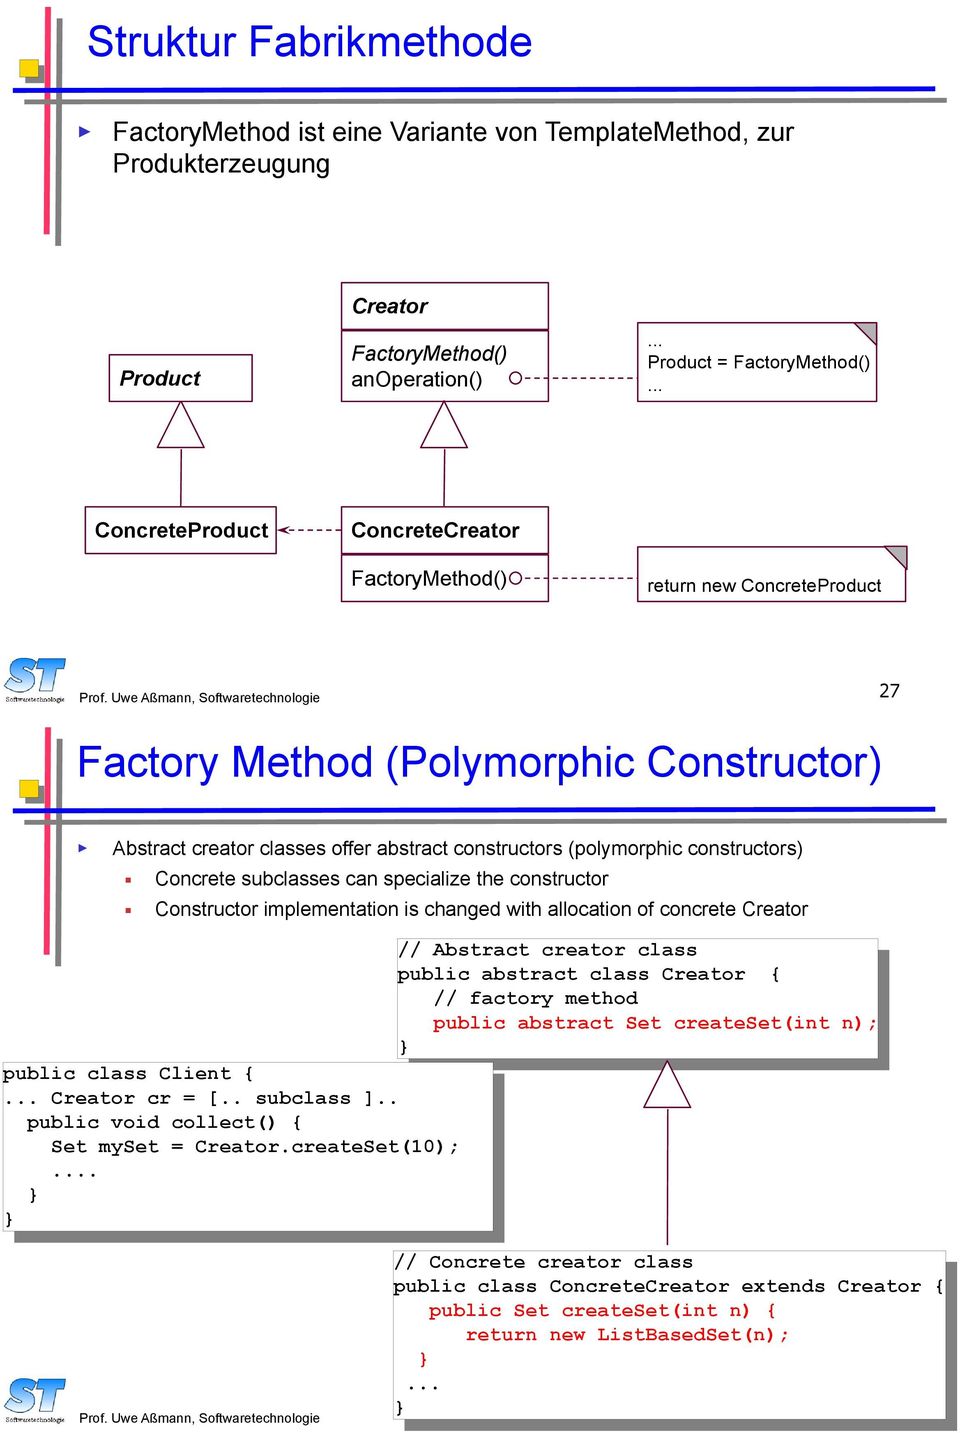 Uwe Aßmann, Softwaretechnologie 27 Factory Method (Polymorphic Constructor) Abstract creator classes offer abstract constructors (polymorphic constructors) Concrete subclasses can specialize the